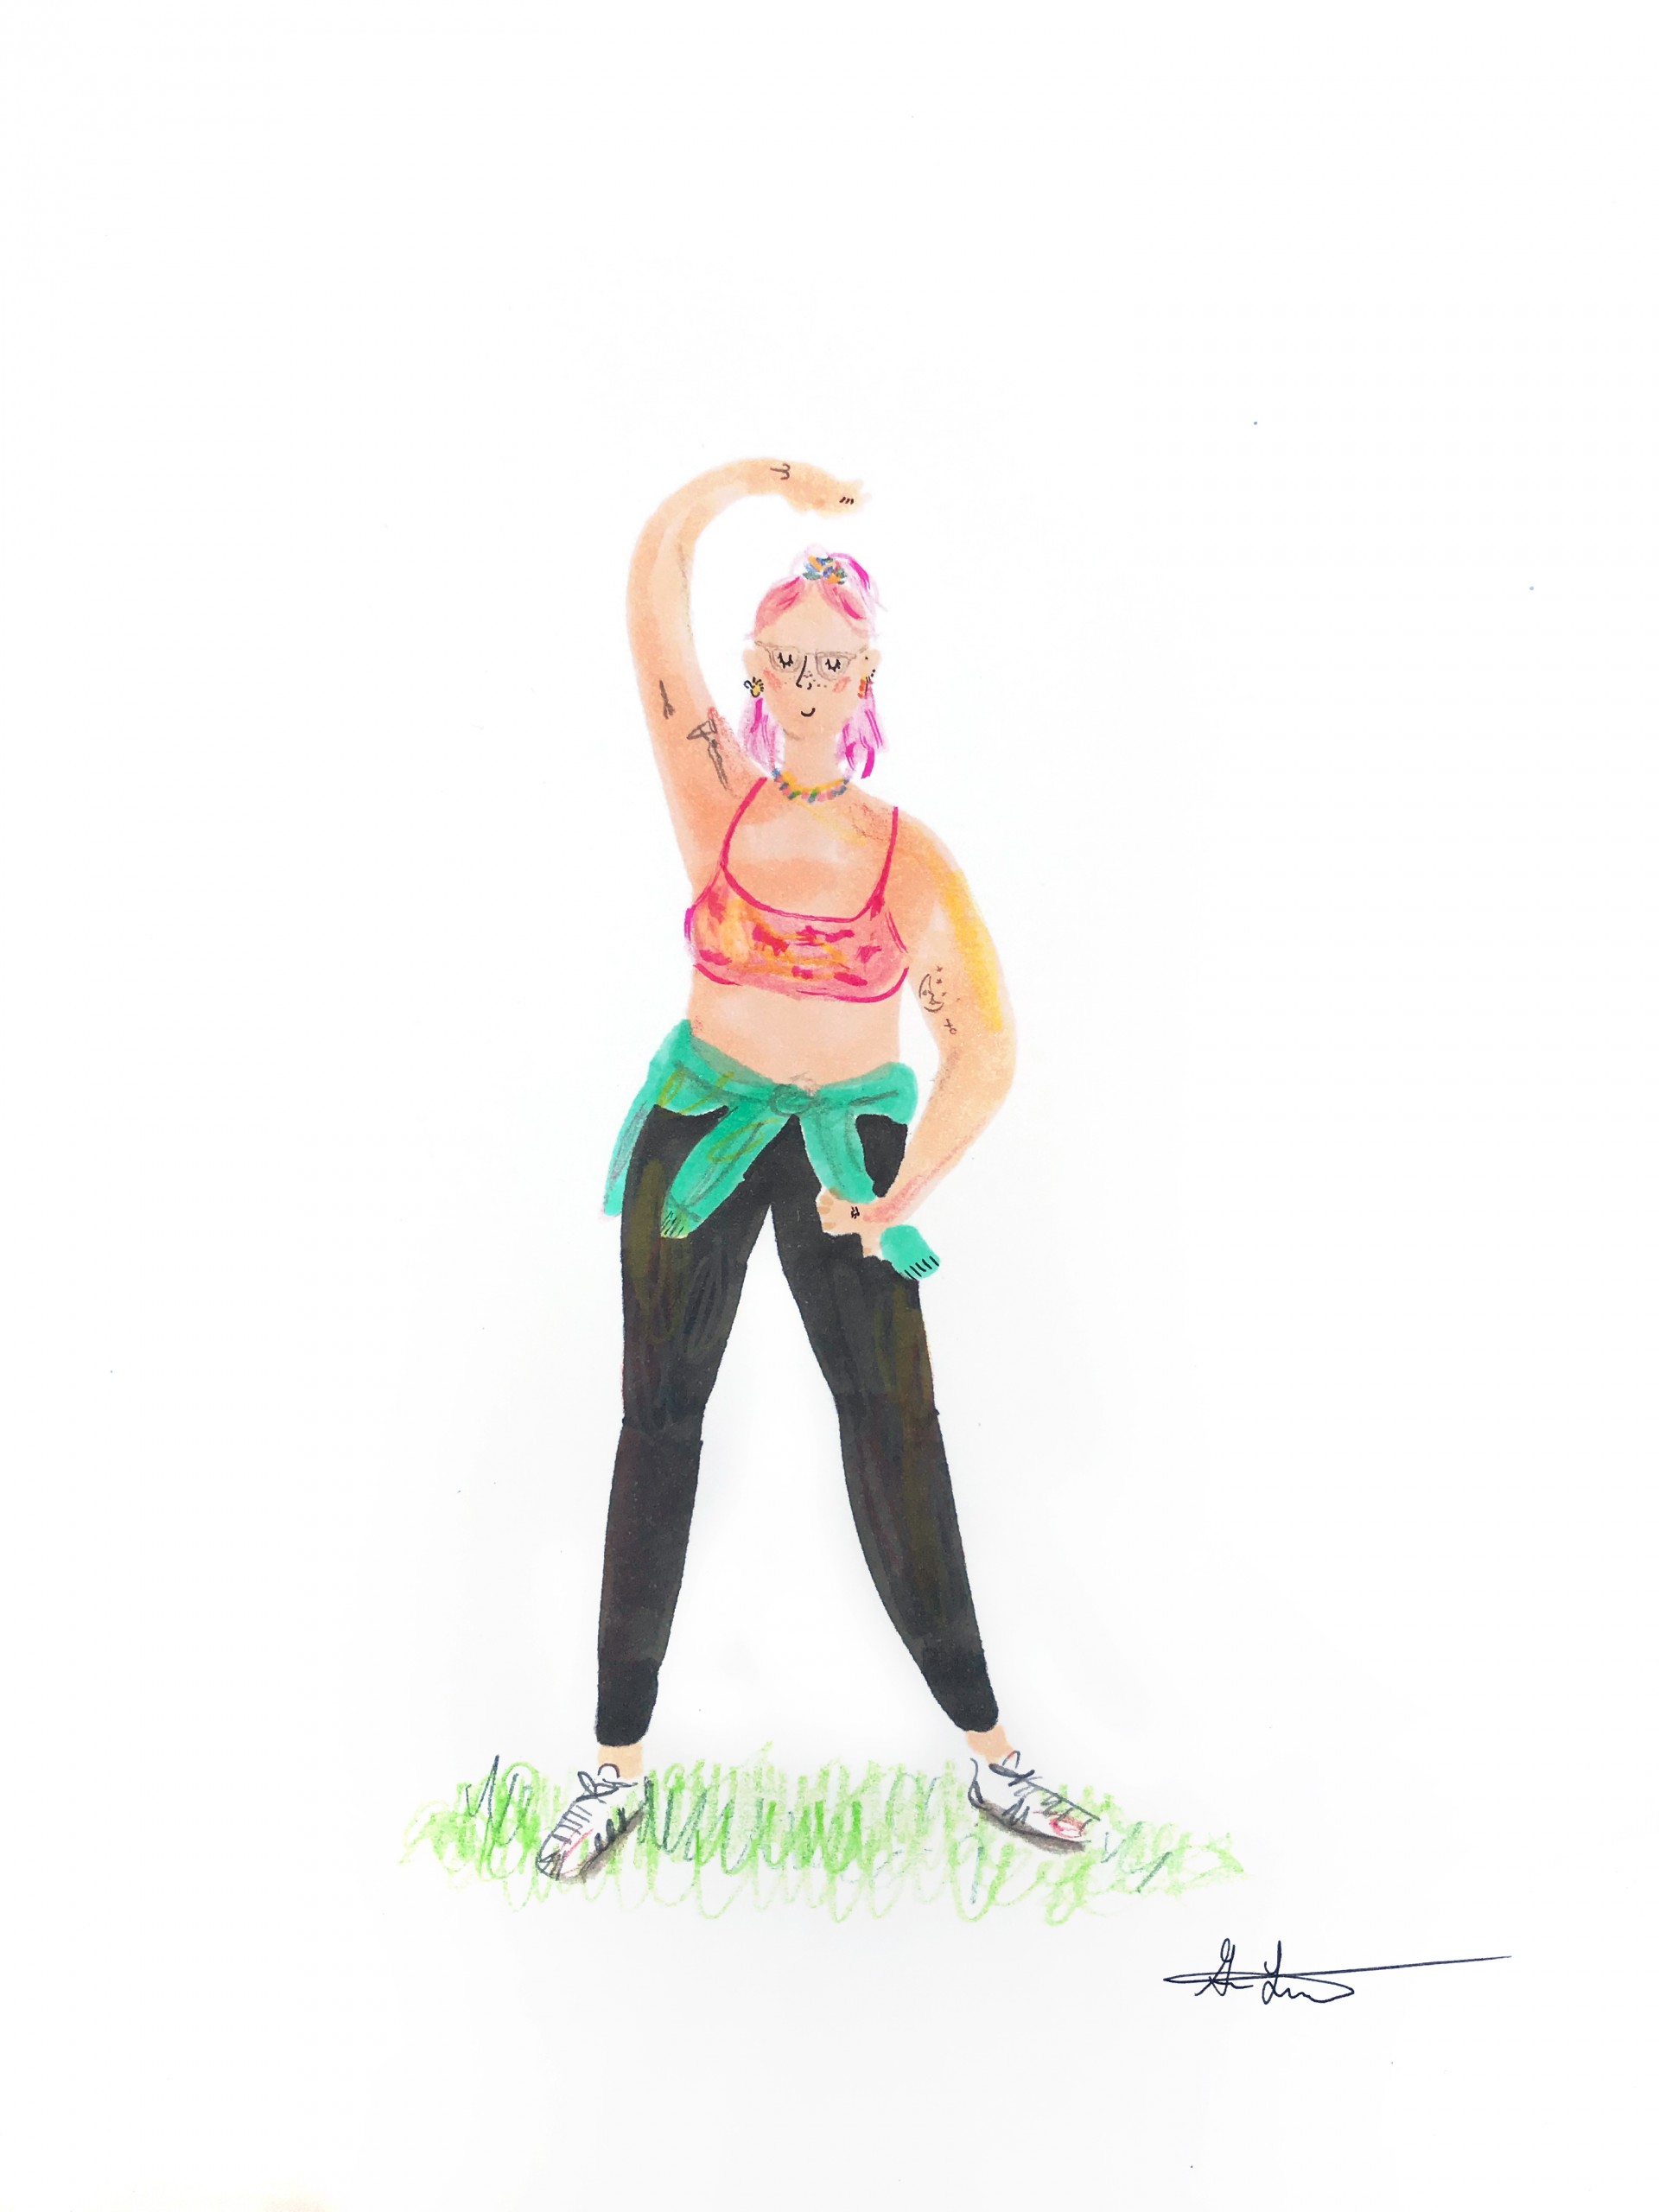 Full body portrait of girl with pink hair, black leggings, pink sports bra and accessories. One arm is curved above head and the other is curved in by waist. 